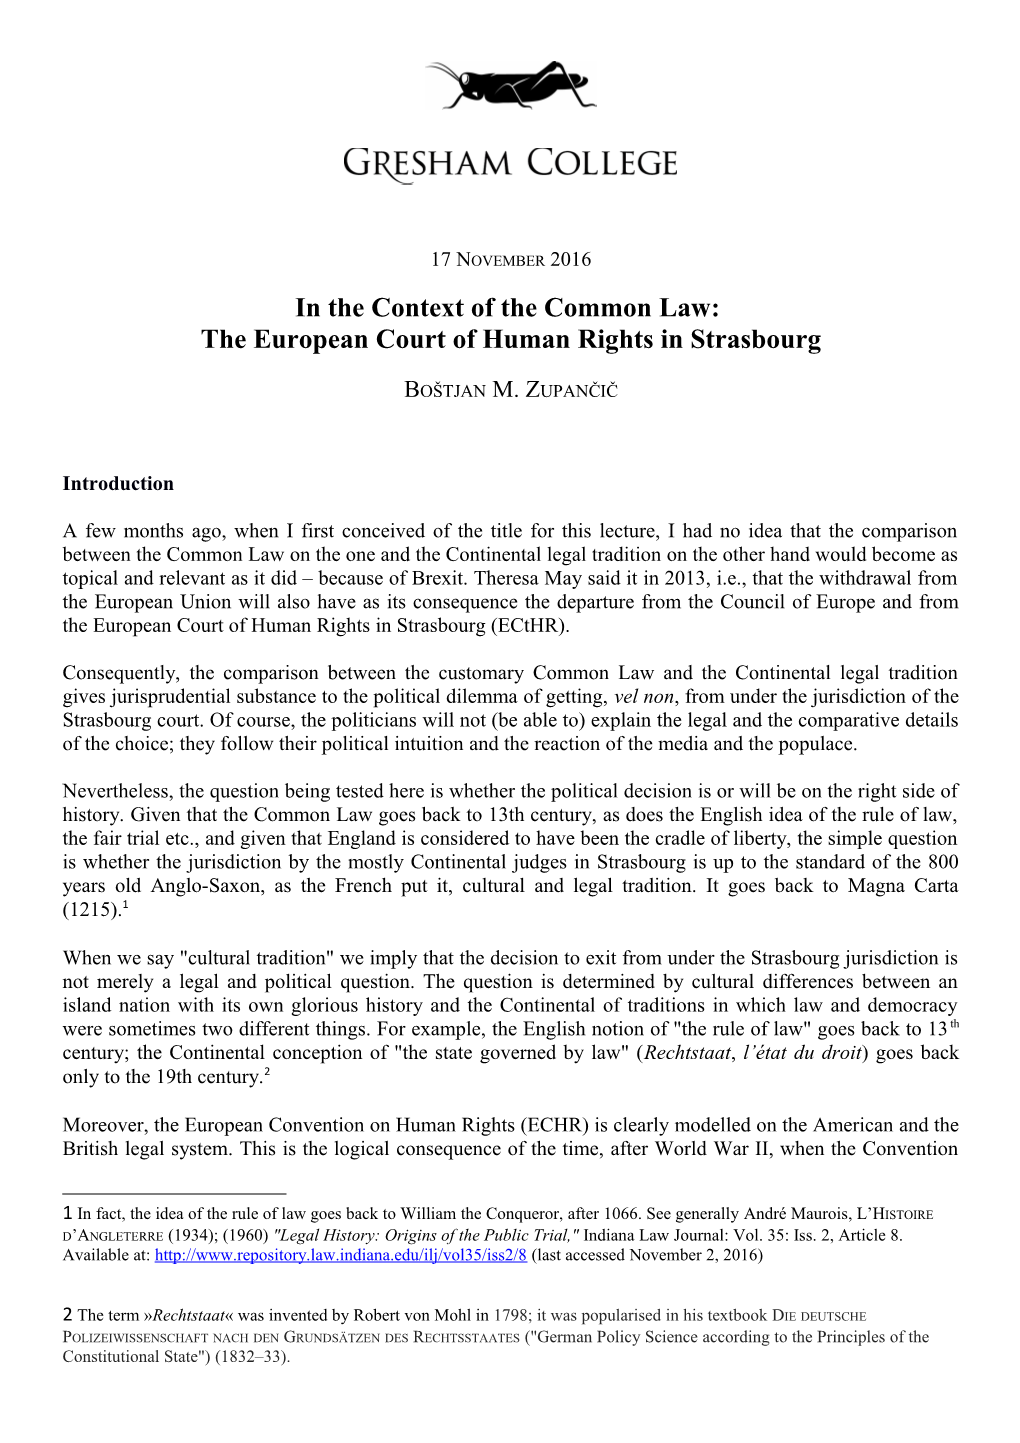 In the Context of the Common Law: the European Court of Human Rights in Strasbourg